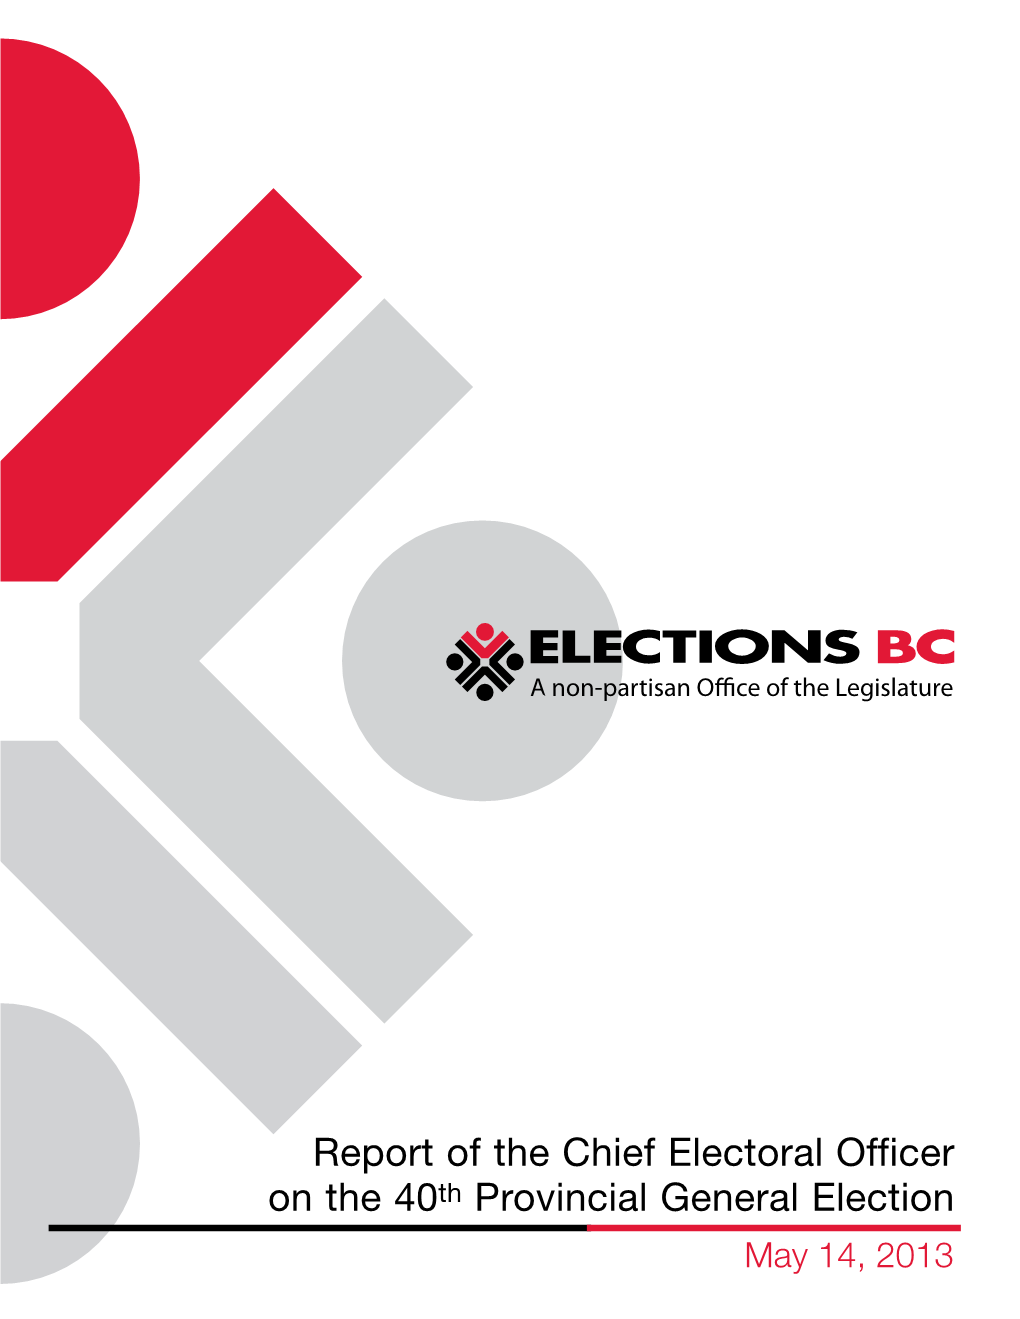 Report of the Chief Electoral Officer on the 40Th Provincial General Election, May 14, 2013